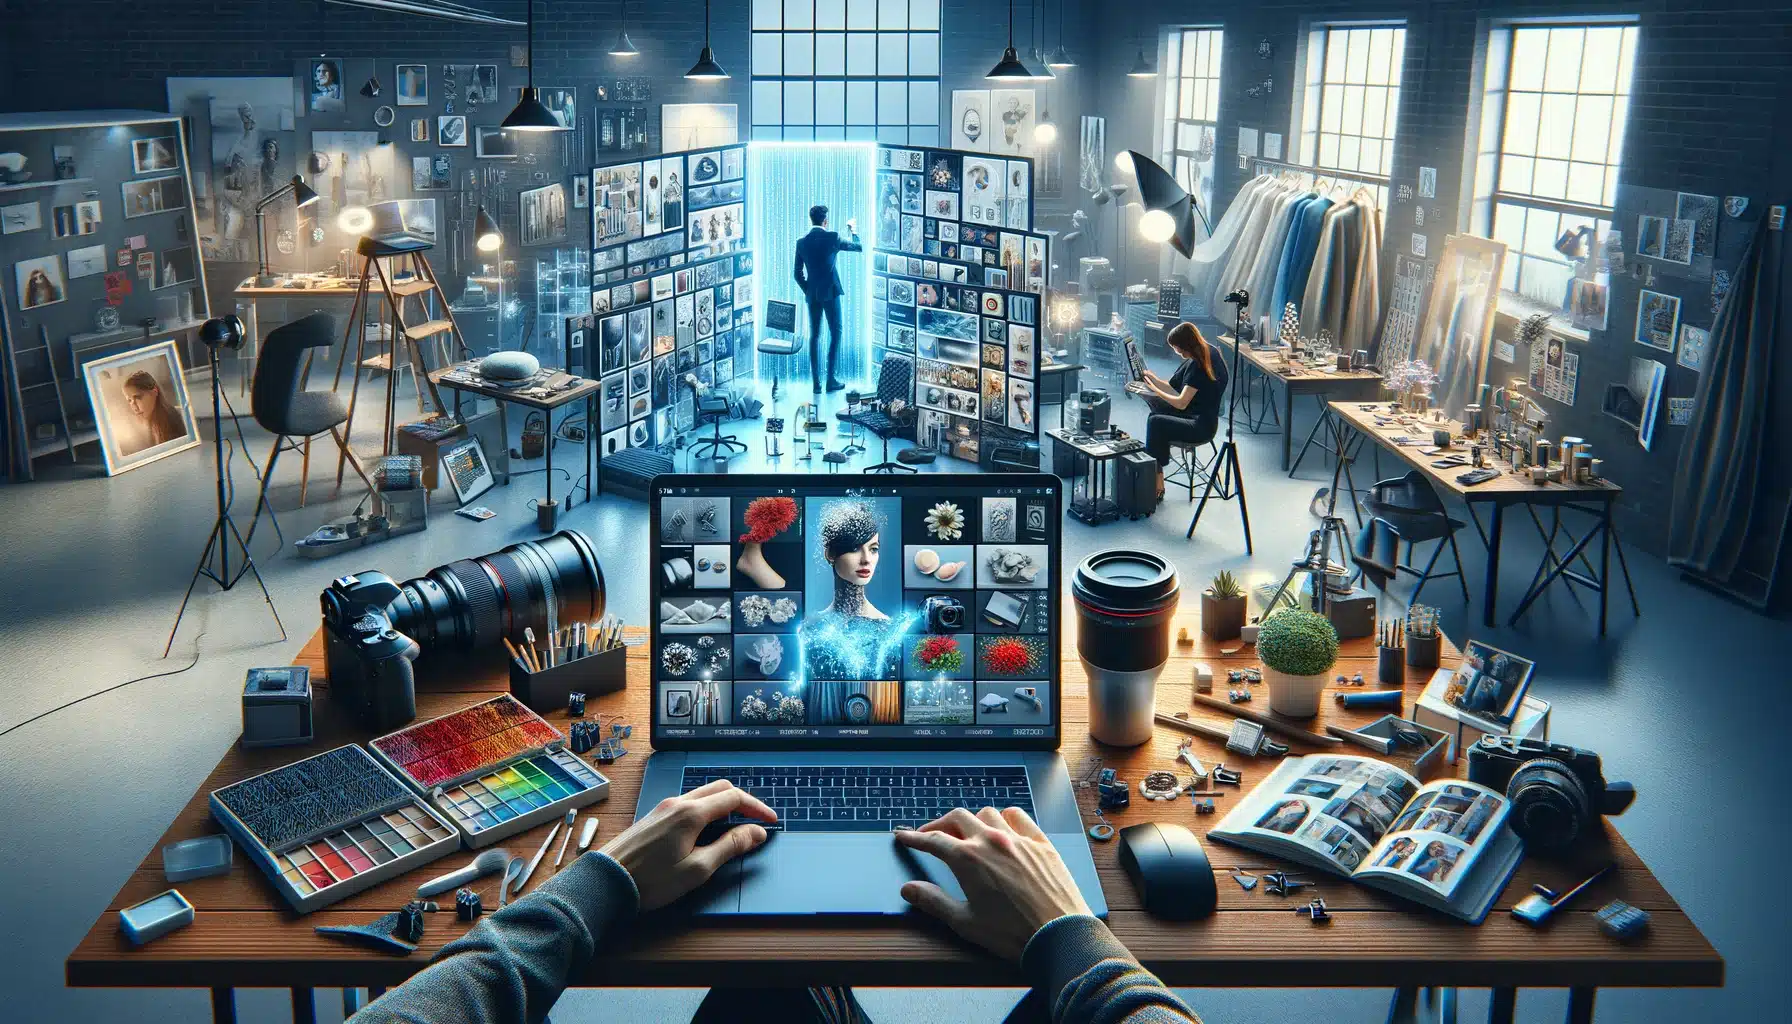 Imagery studio scene with one person working on a laptop and another taking snapshots, surrounded by imaginative snapshot inspirations.